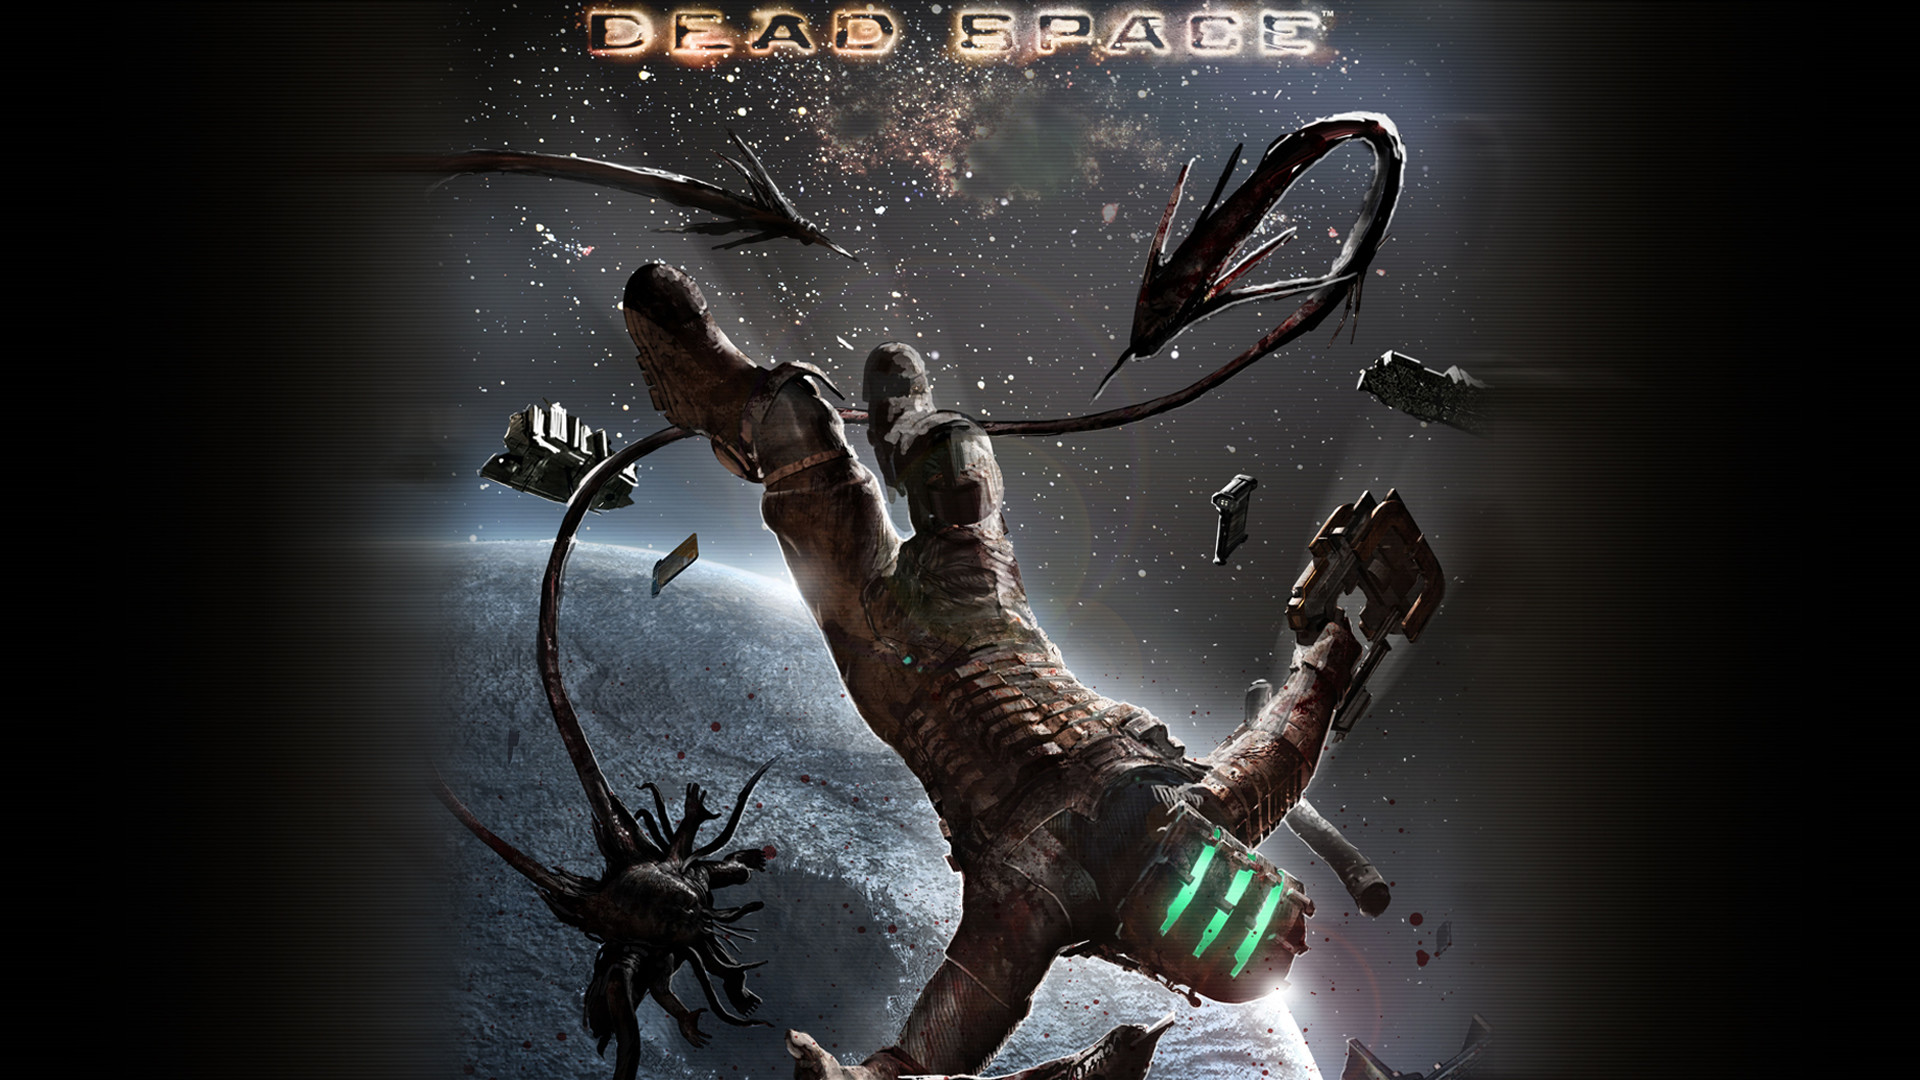 Dead Space Wallpaper Game Wallpapers 1920x1080